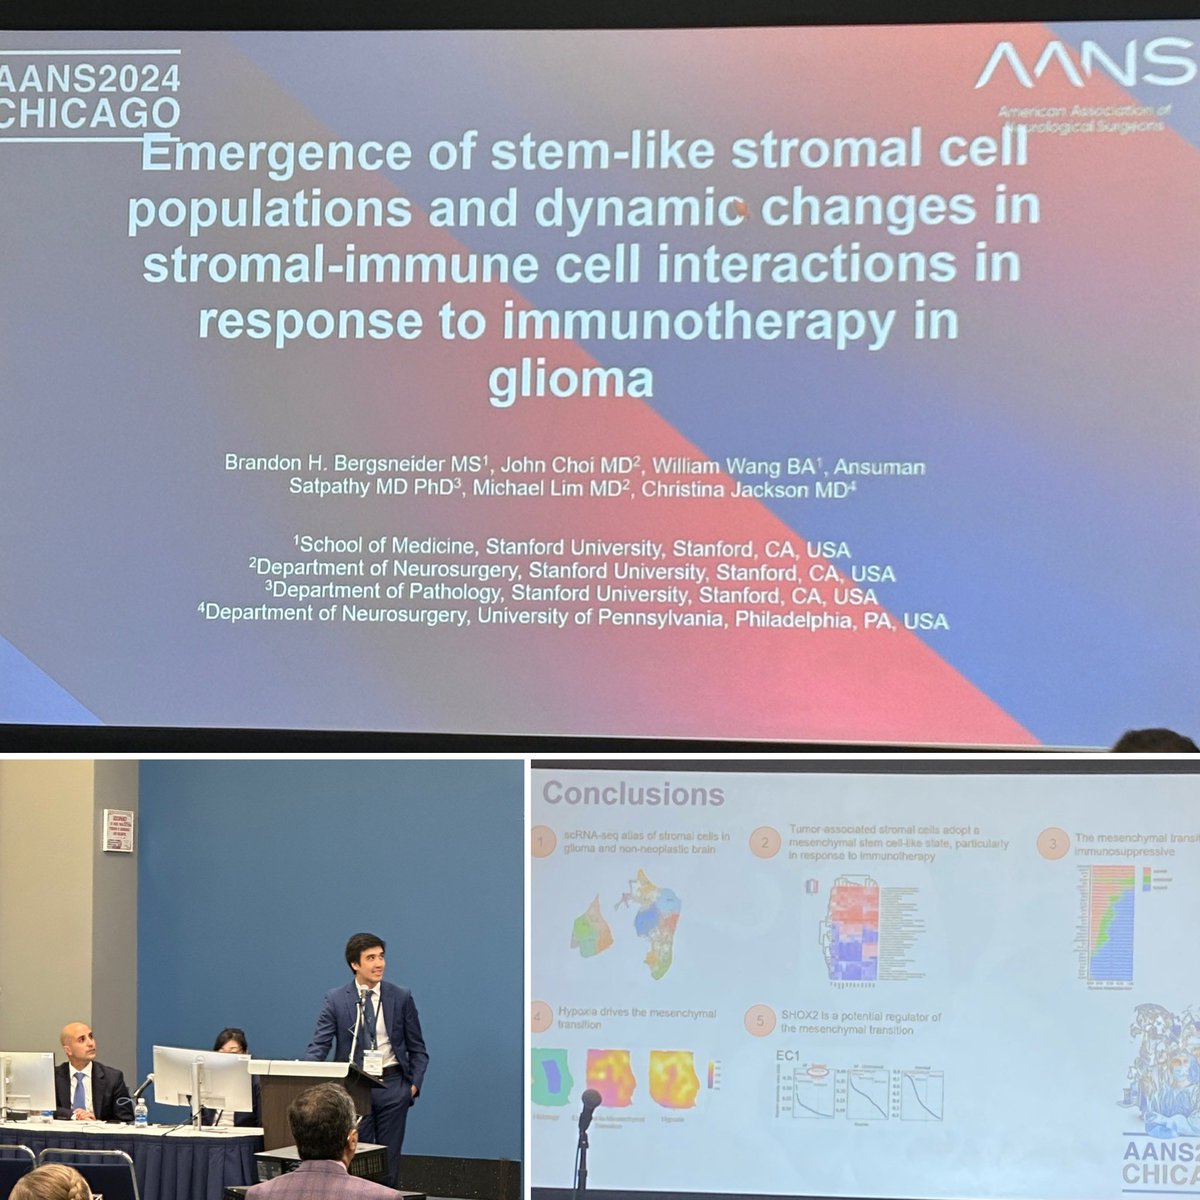 A great presentation on stem-like stromal cells and their interactions with immunotherapy for glioma treatment by Stanford MS3, @BrandonBergs ! @StanfordNsurg @StanfordMed @MichaelLimMD @DoctorZada @NeurosurgeryUSC @MCWNeurosurgery